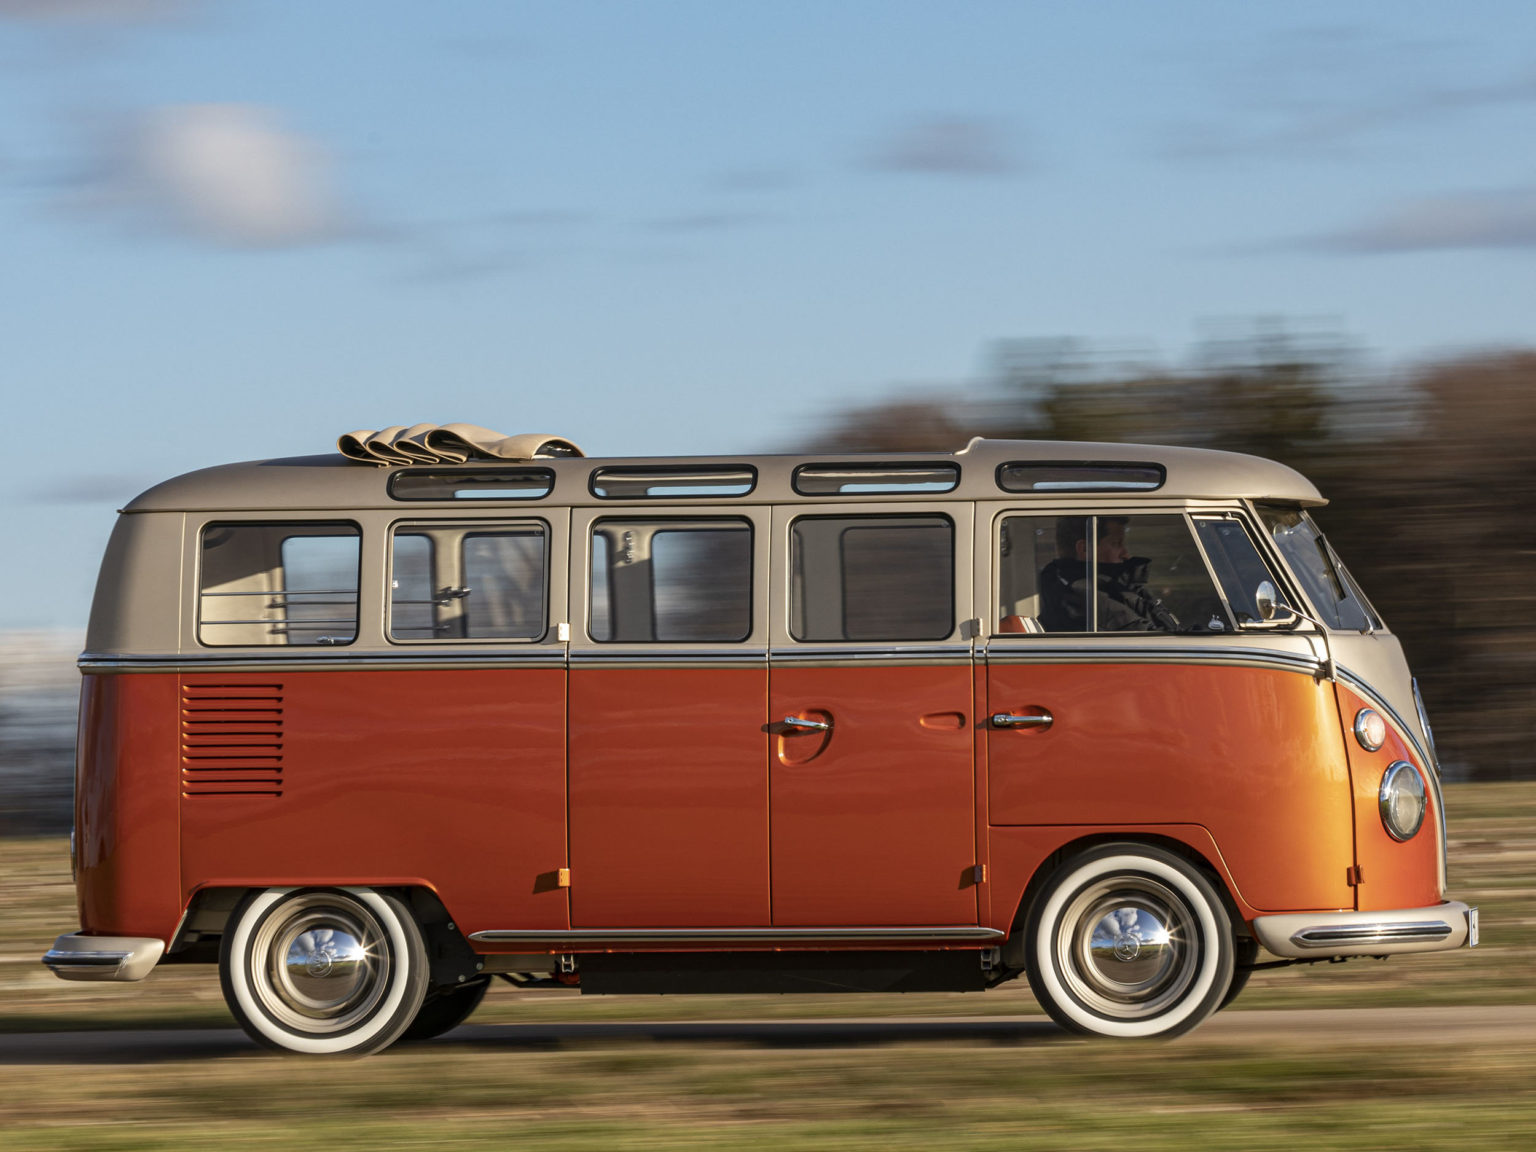 Volkswagen has partnered with eClassics to retrofit a 1966 T1 Samba Bus and make it an electric vehicle.